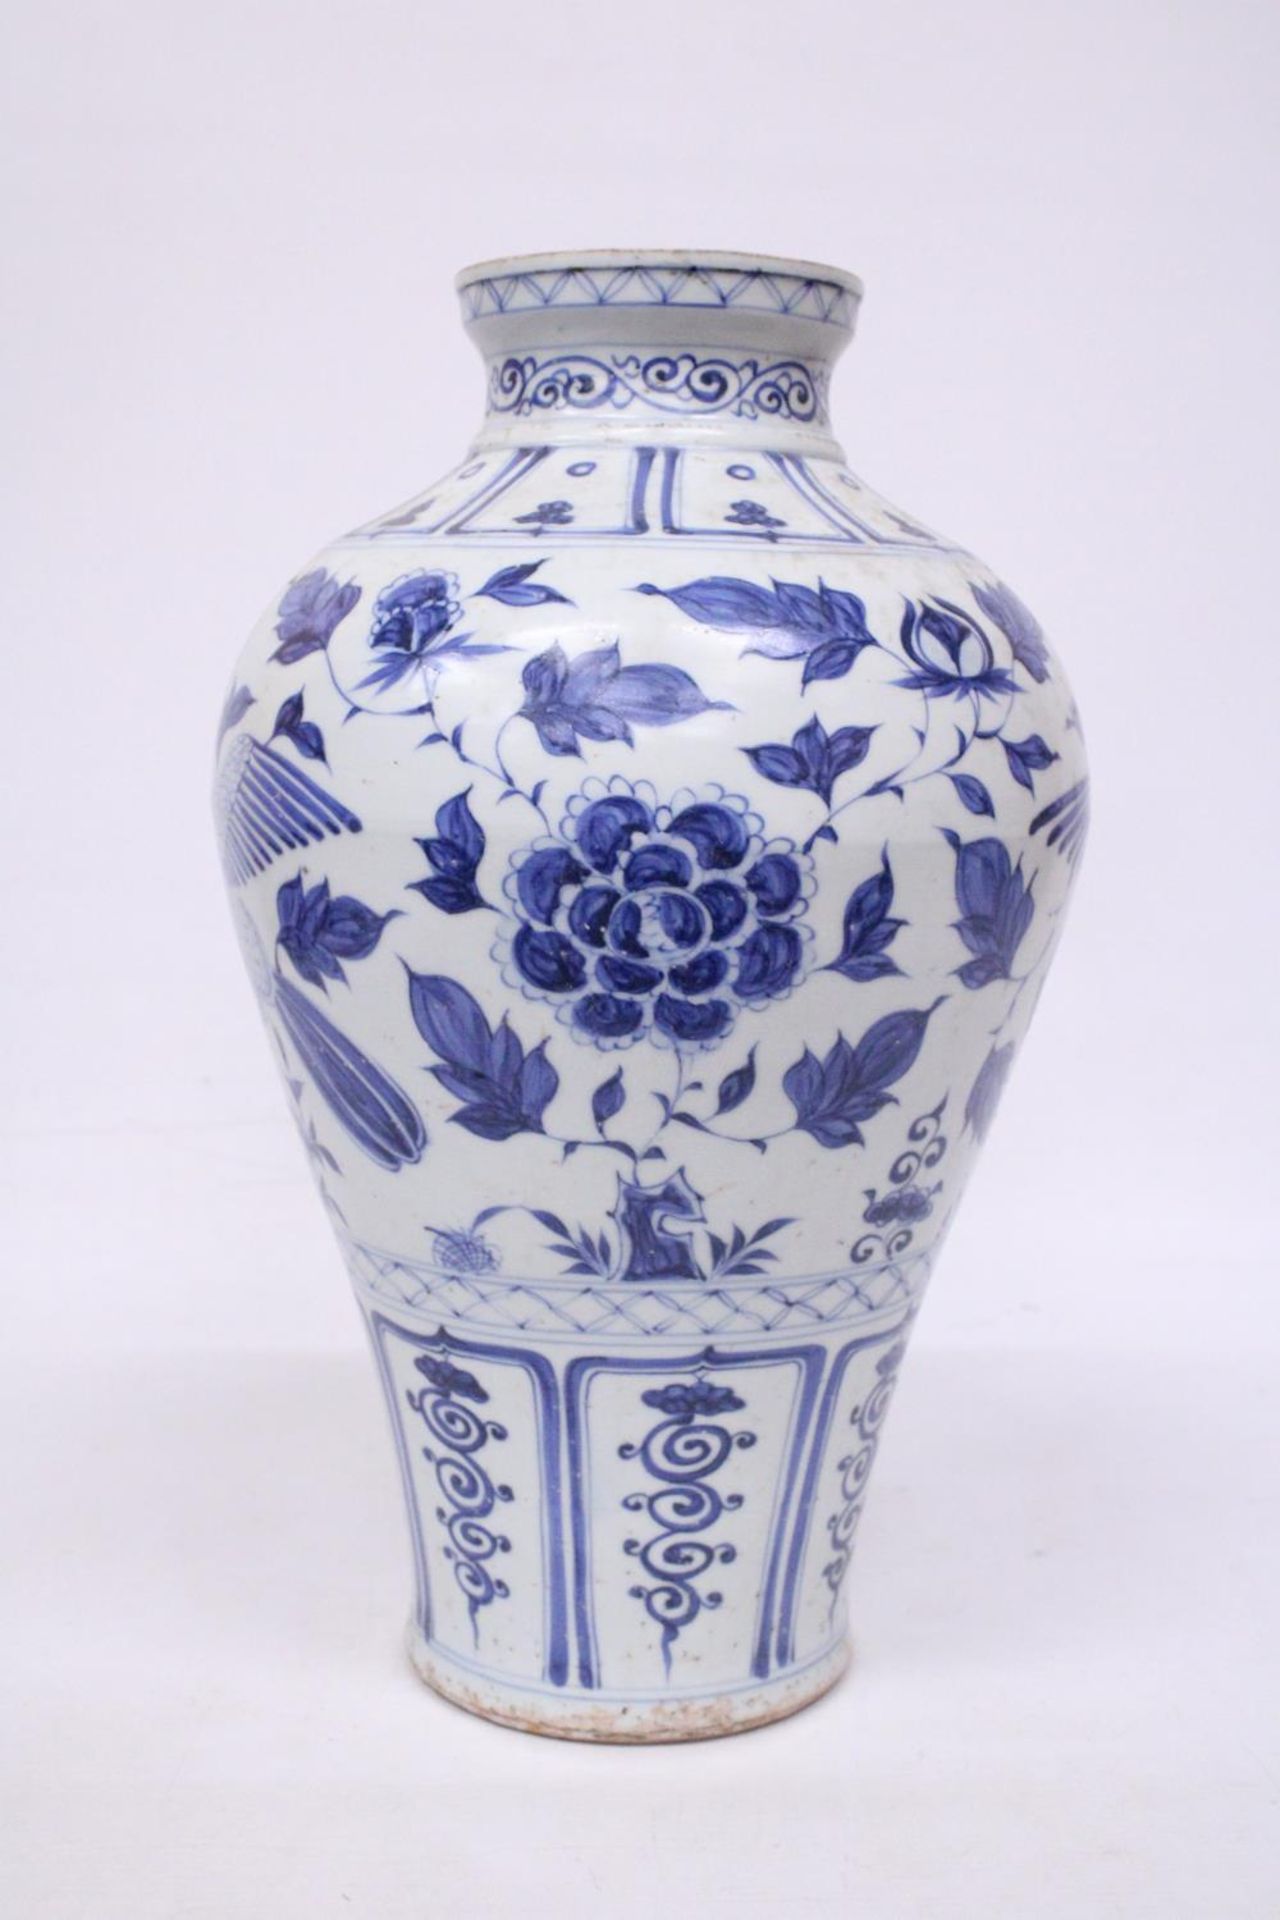 A LARGE CHINESE MING STYLE BLUE AND WHITE POTTERY MEIPING VASE DECORATED WITH CRANES IN FLIGHT - - Image 4 of 5